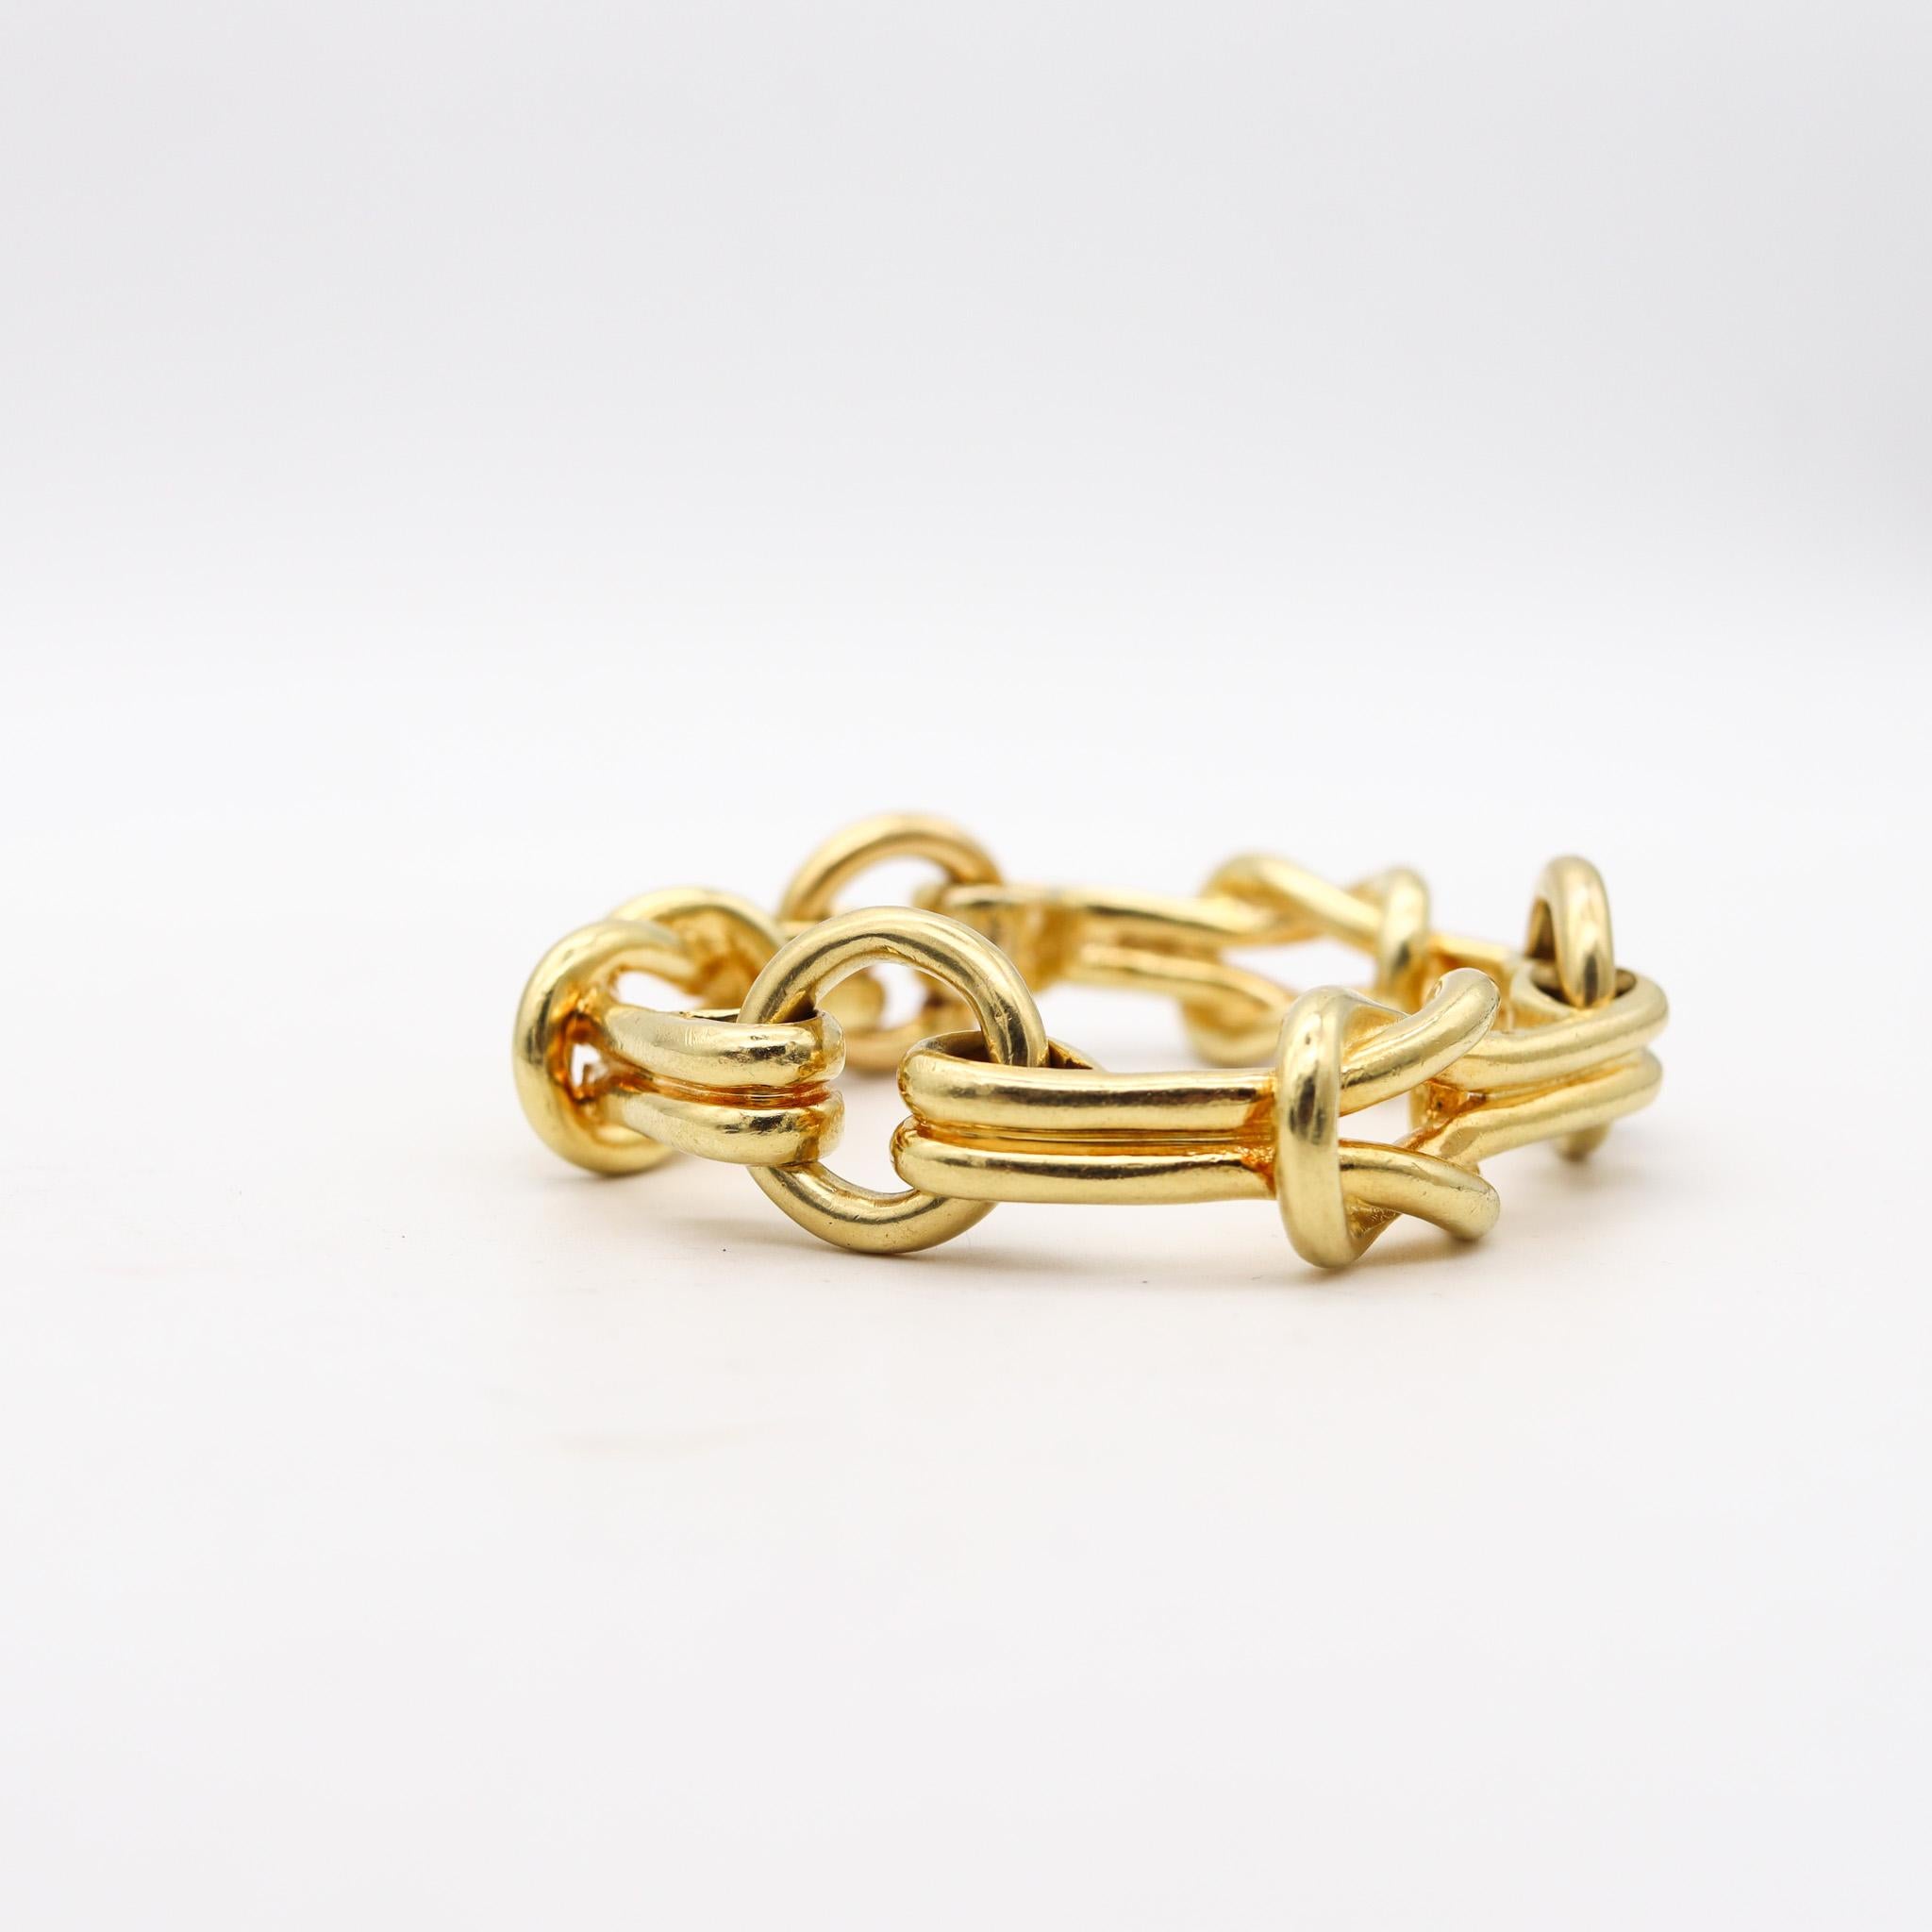 Cartier 1970 Hercules Knots Statement Links Bracelet In Solid 18Kt Yellow Gold For Sale 1